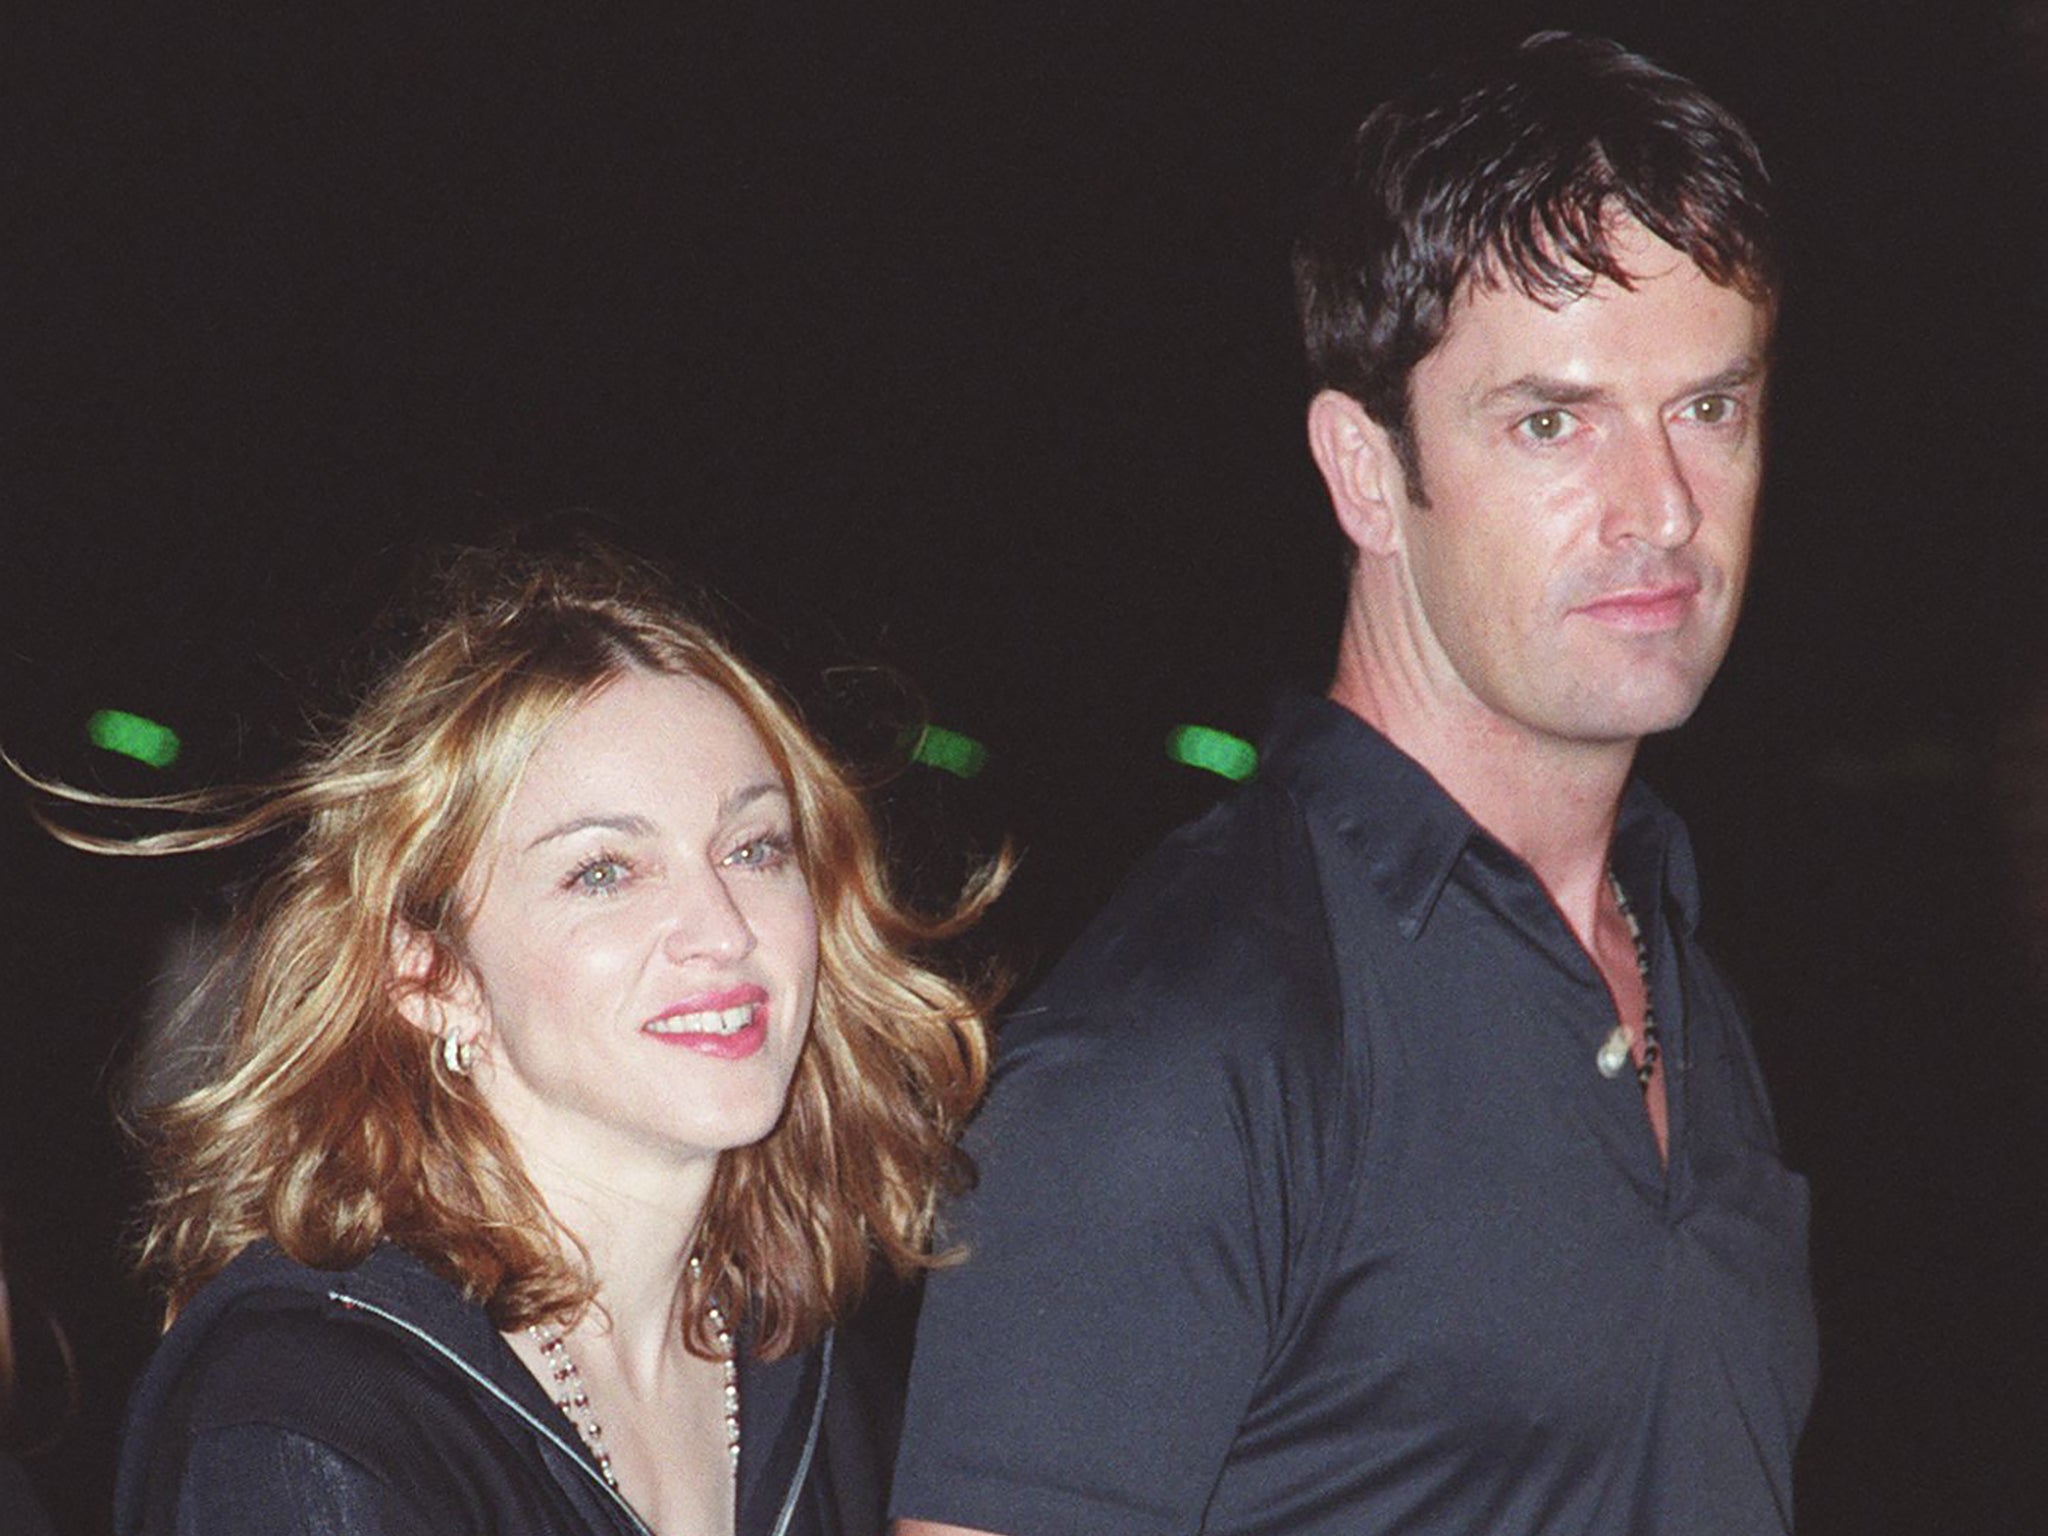 Madonna and Rupert Everett at an event in 1999